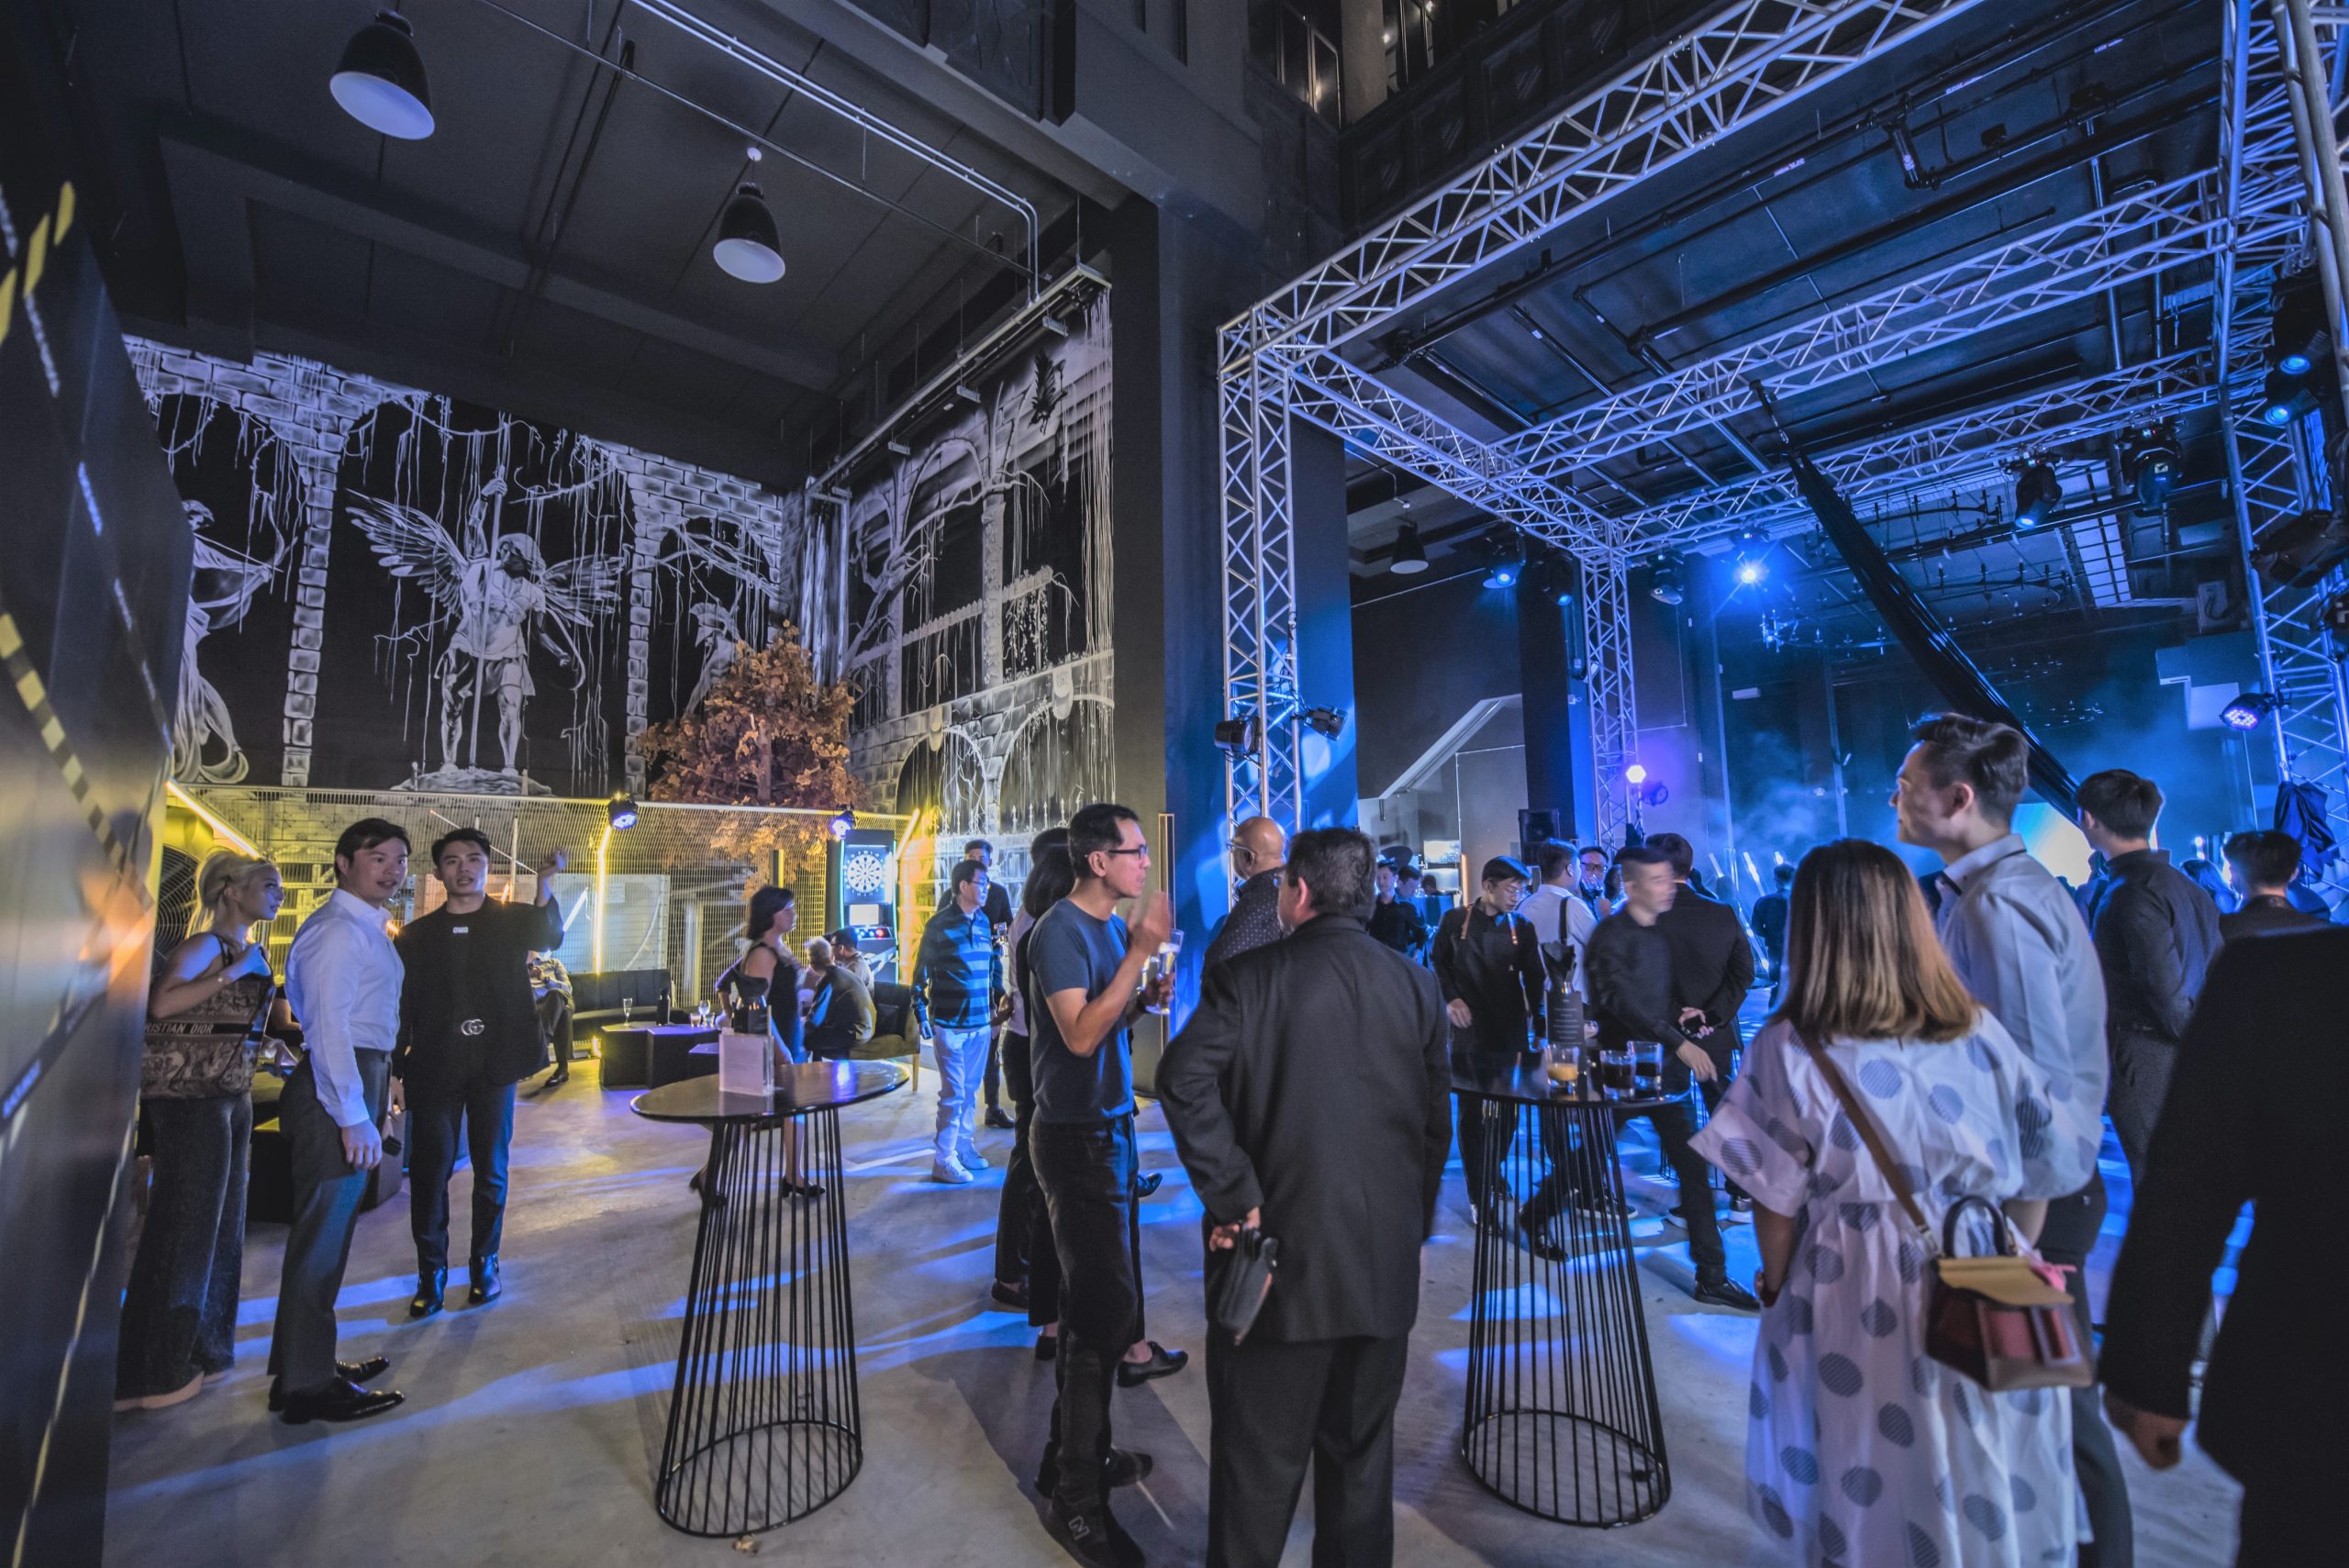 Invited guests of Rolls-Royce mingling with one another at The Mill, where the launch was held